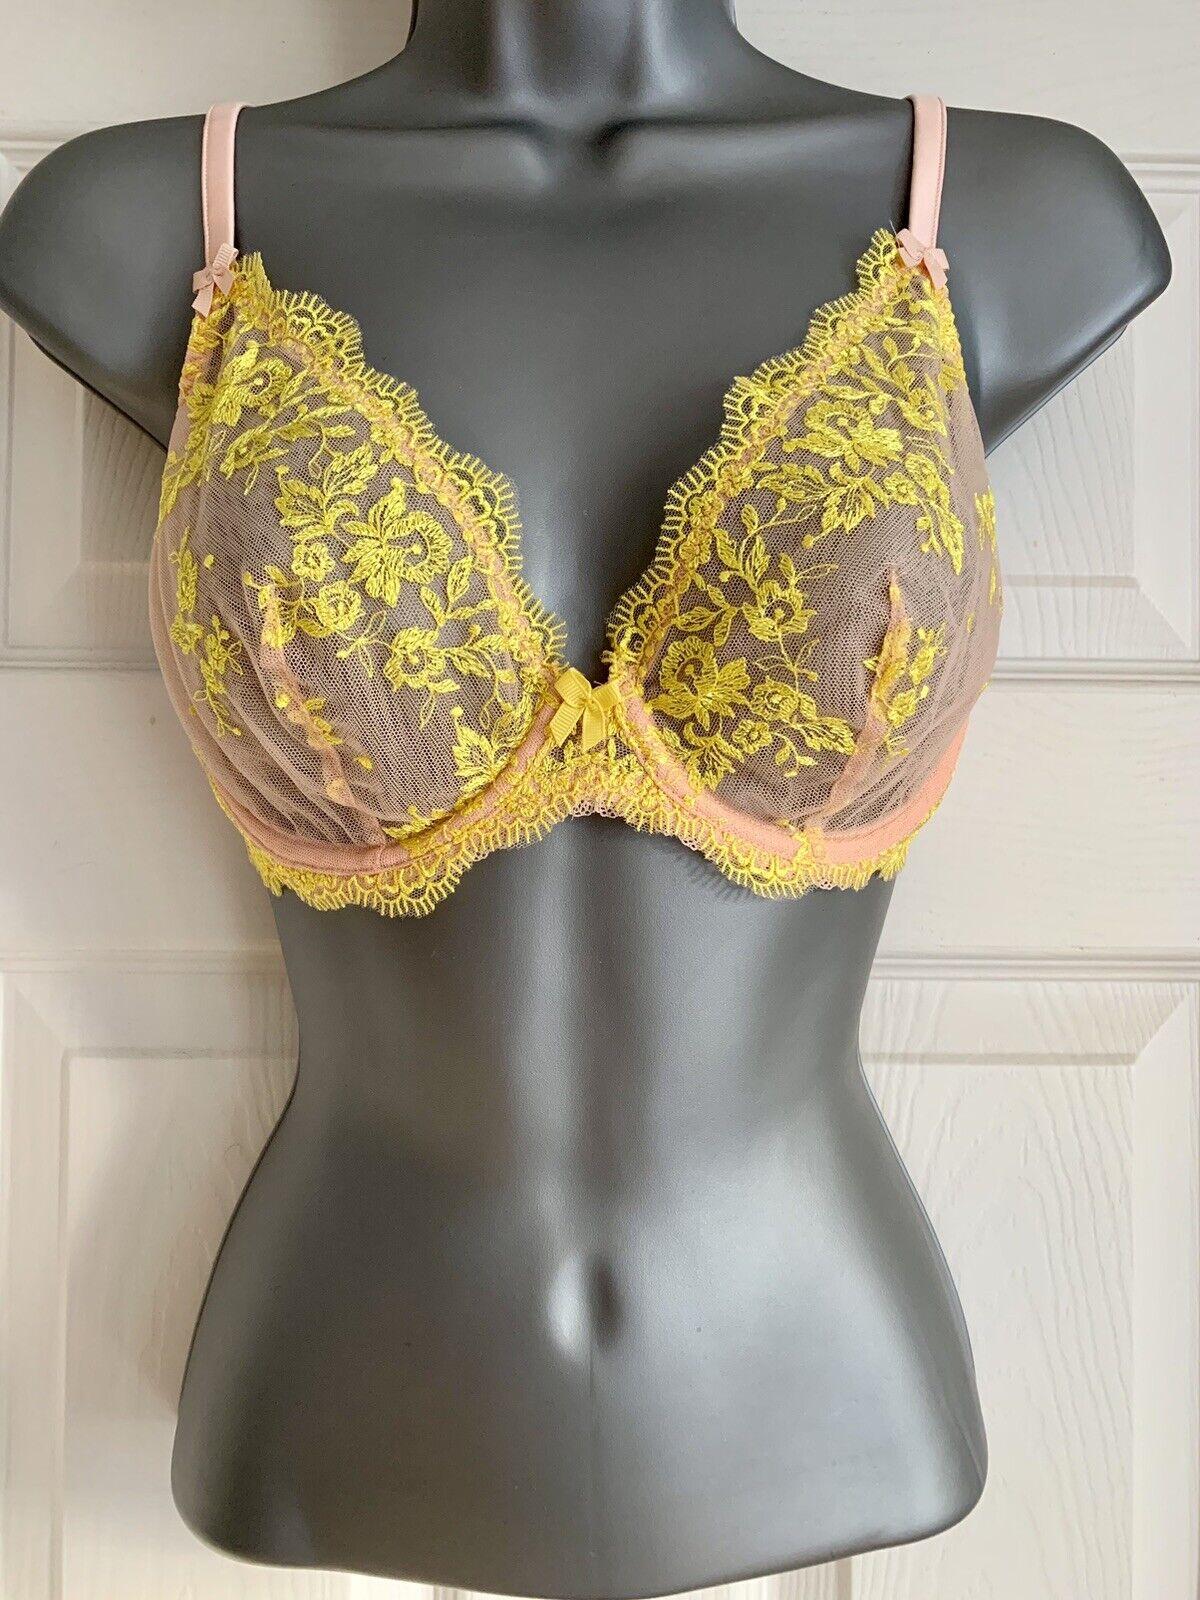 EX M*S Apricot Embroidery Wired Plunge Bra in Sizes 34C or 32H RRP £20